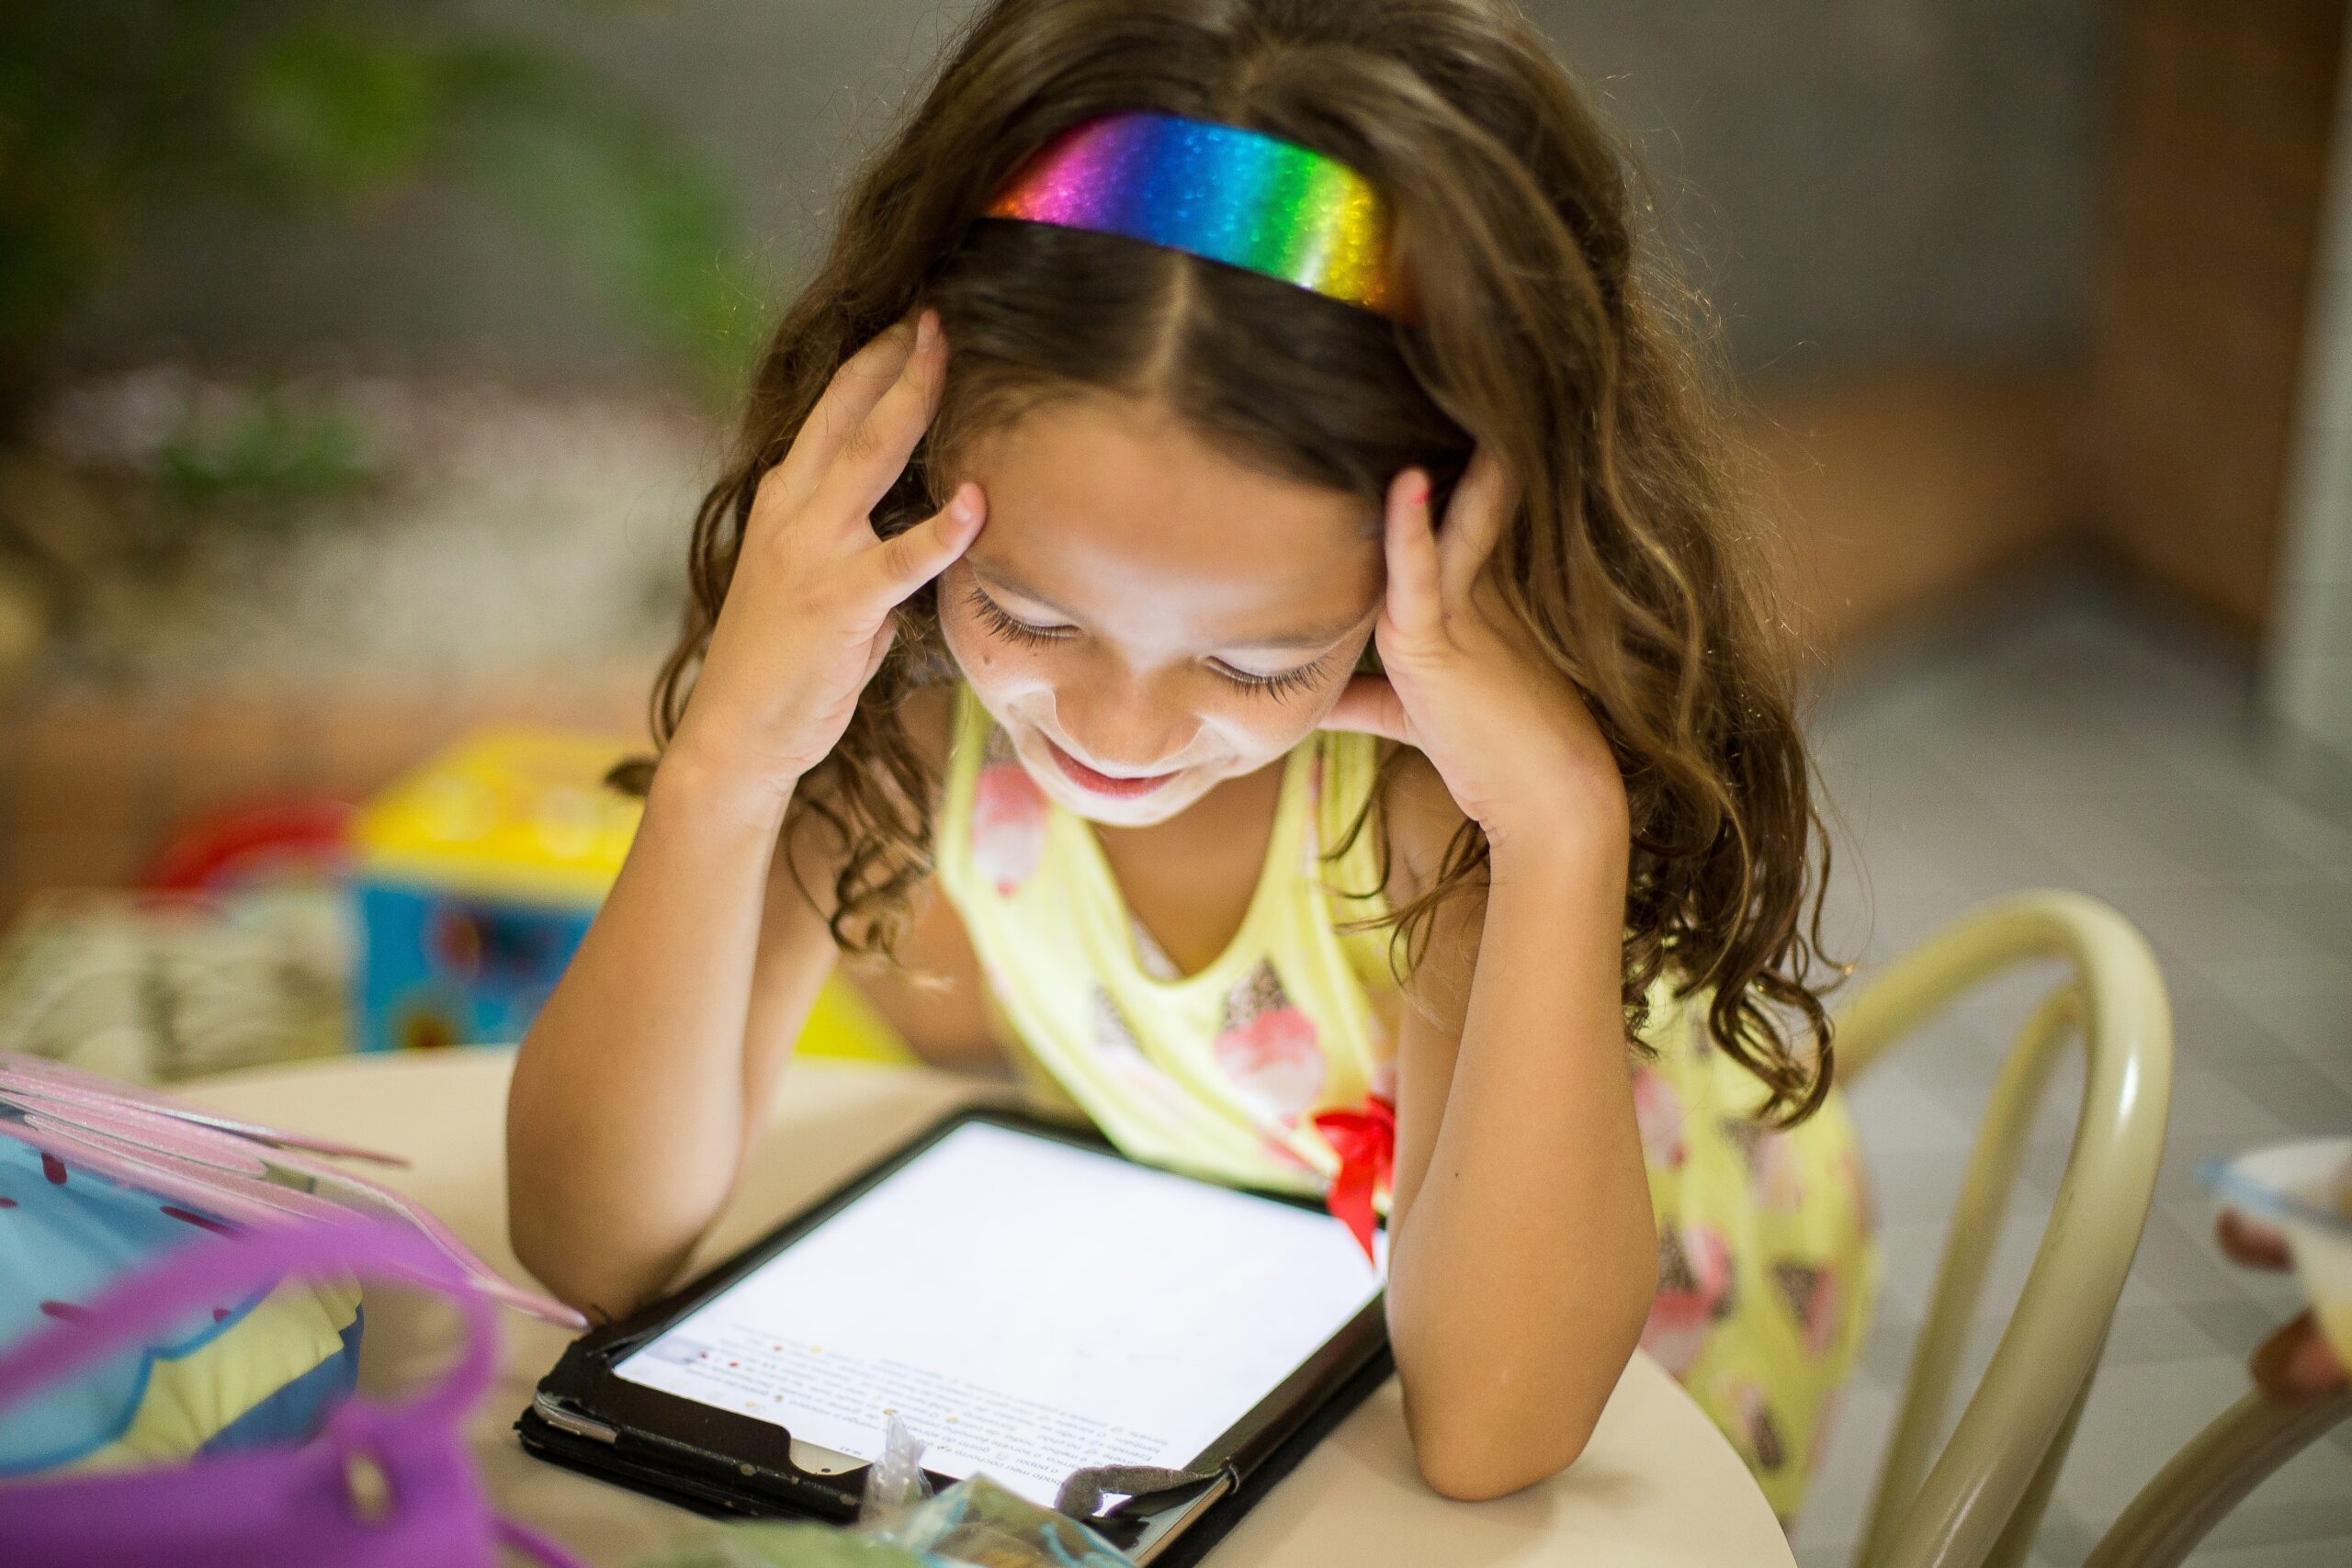 Alternatives to Handing Your Child More Technology